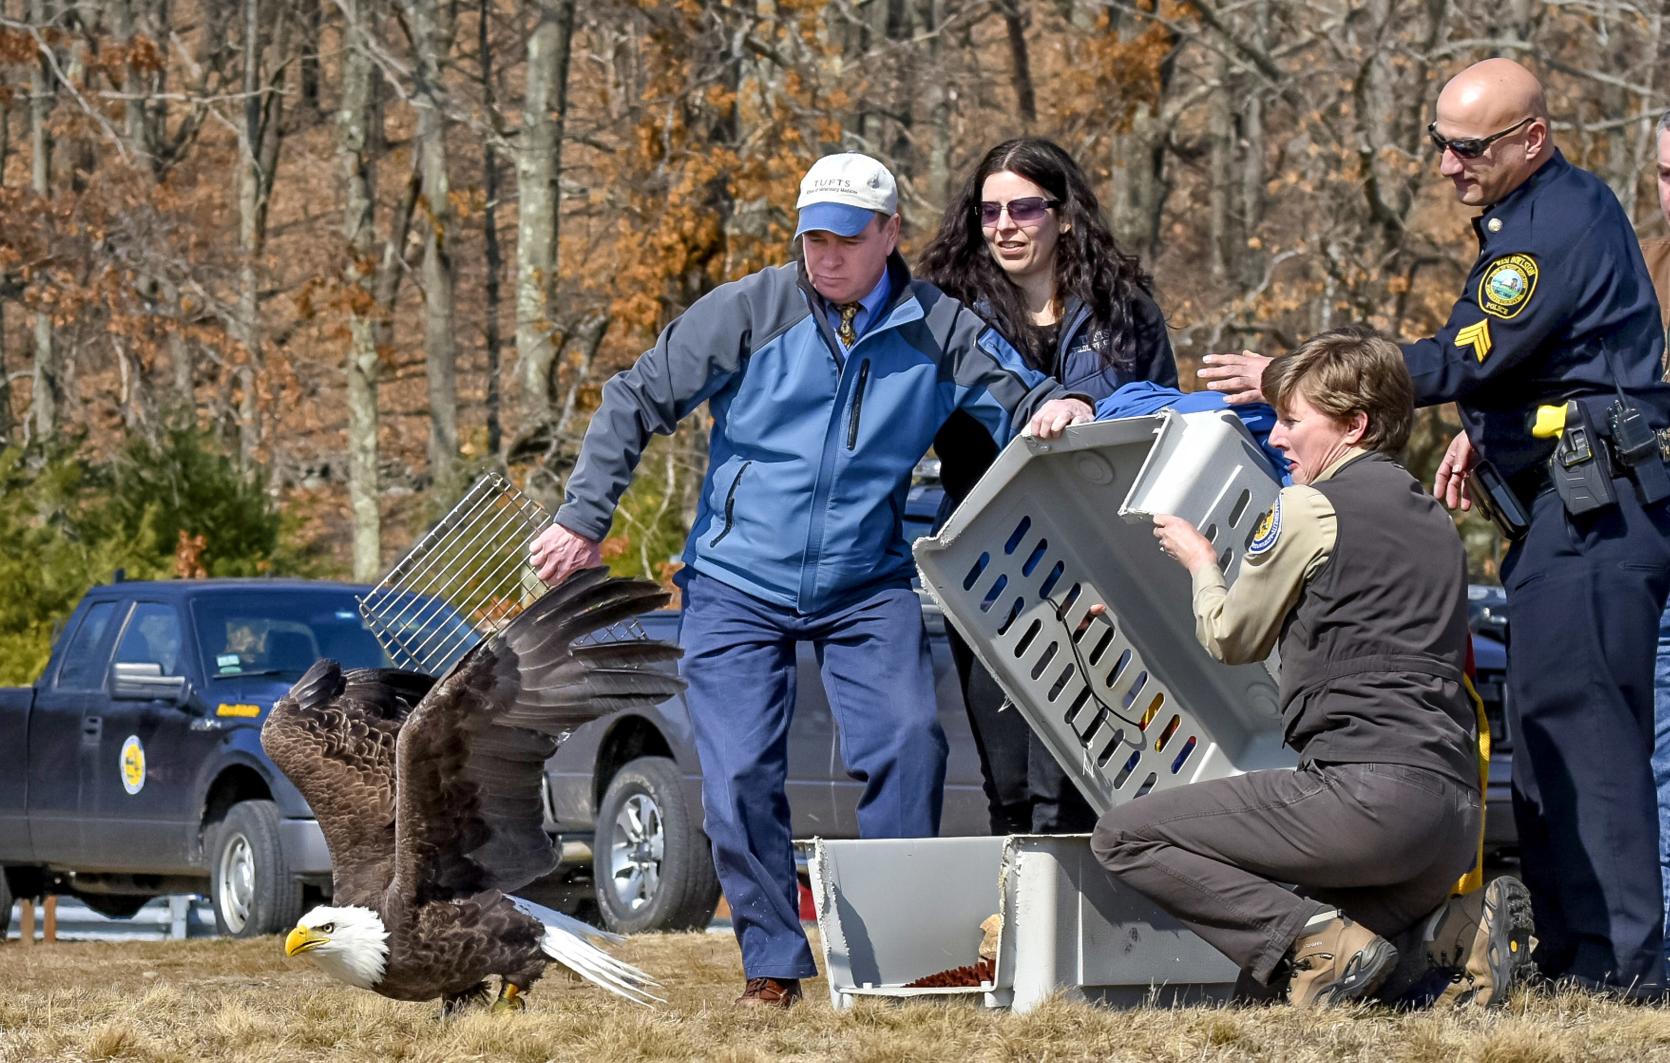 larson and others releasing a rehabilitated bald eagle